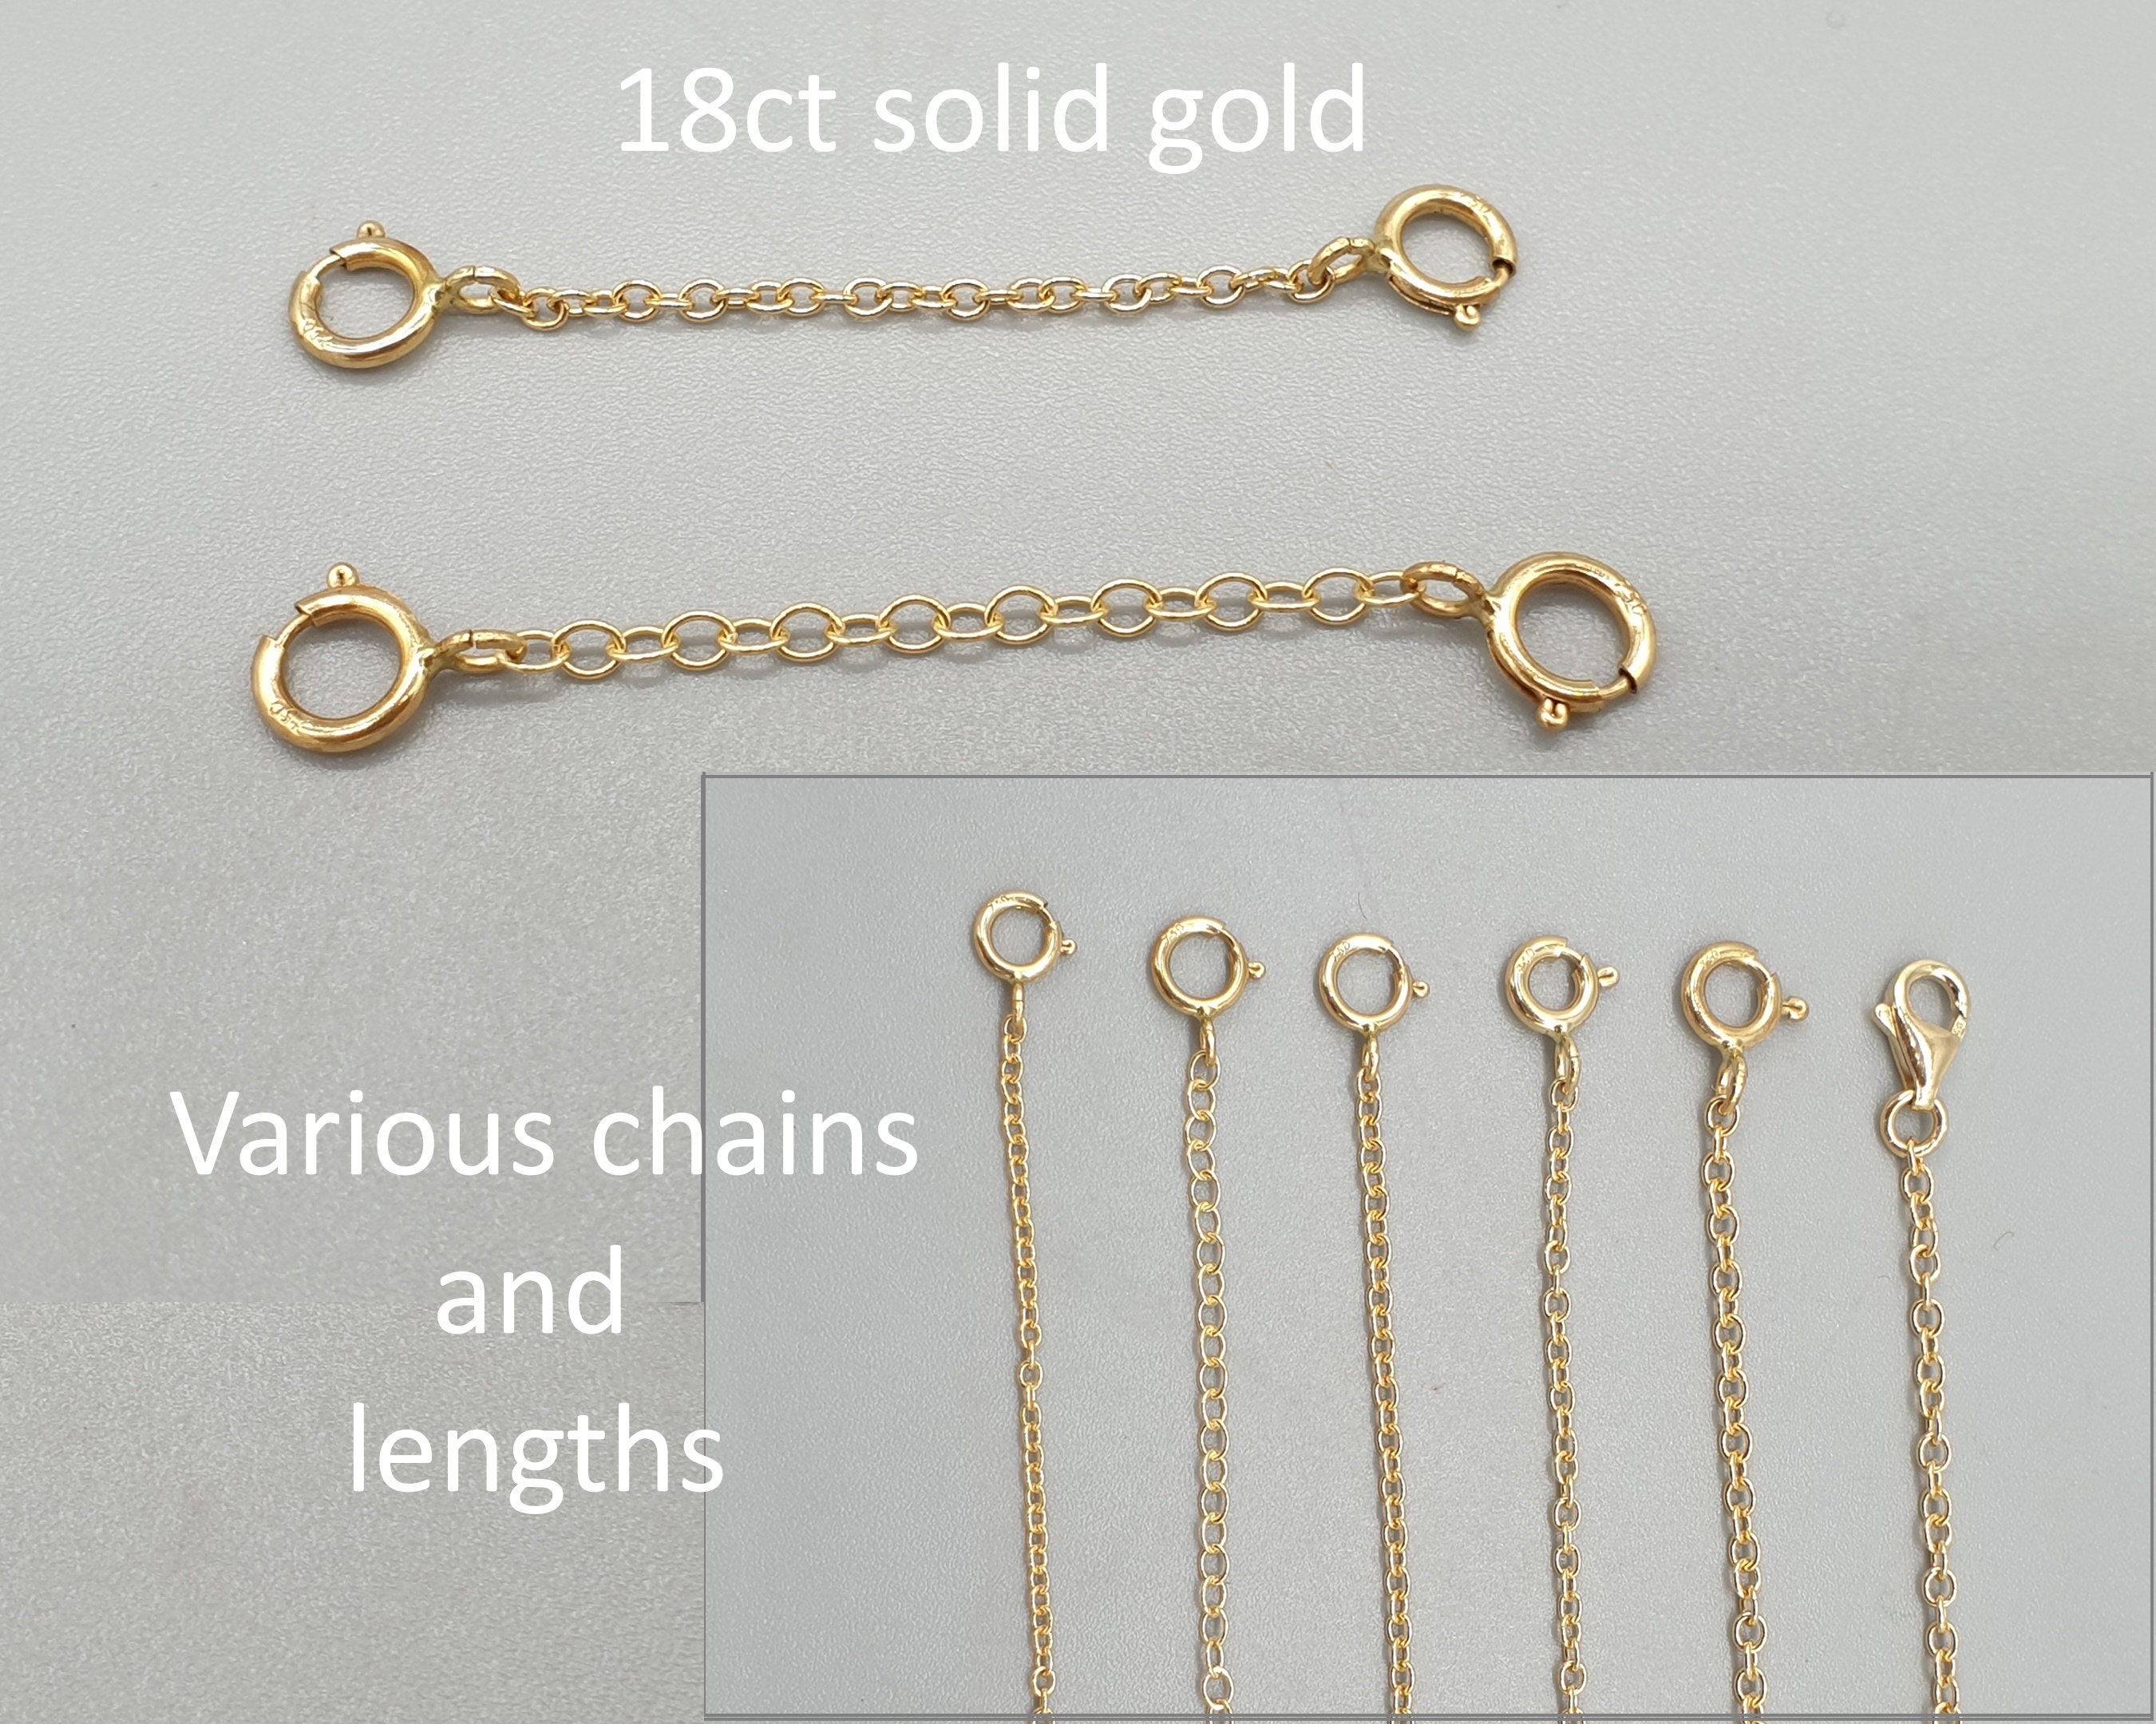  Necklace Extenders 14K Gold Plated Solid Brass Chain